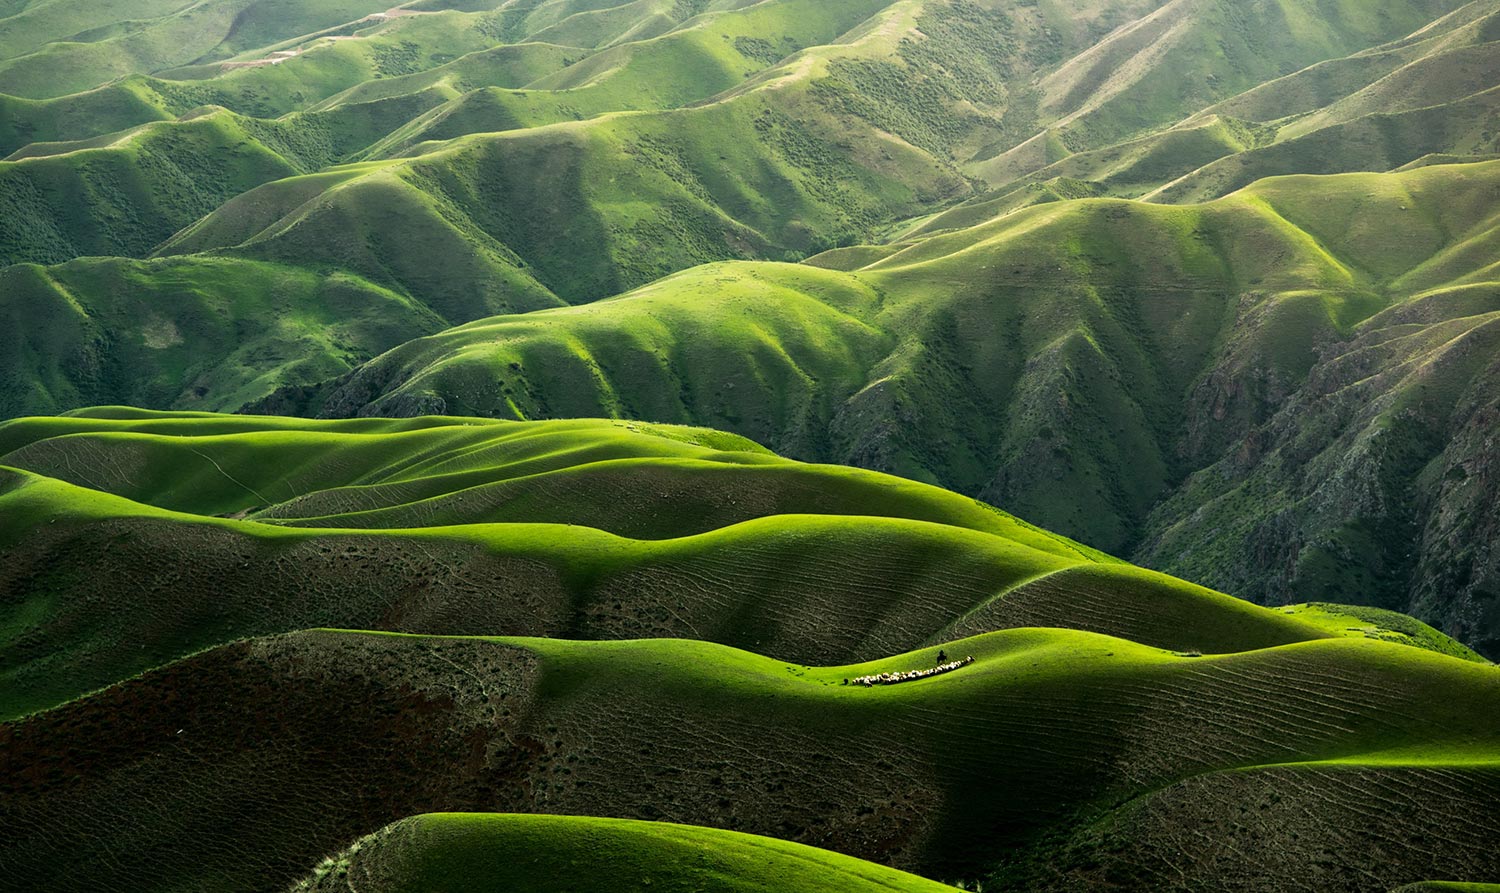 The endless green layers